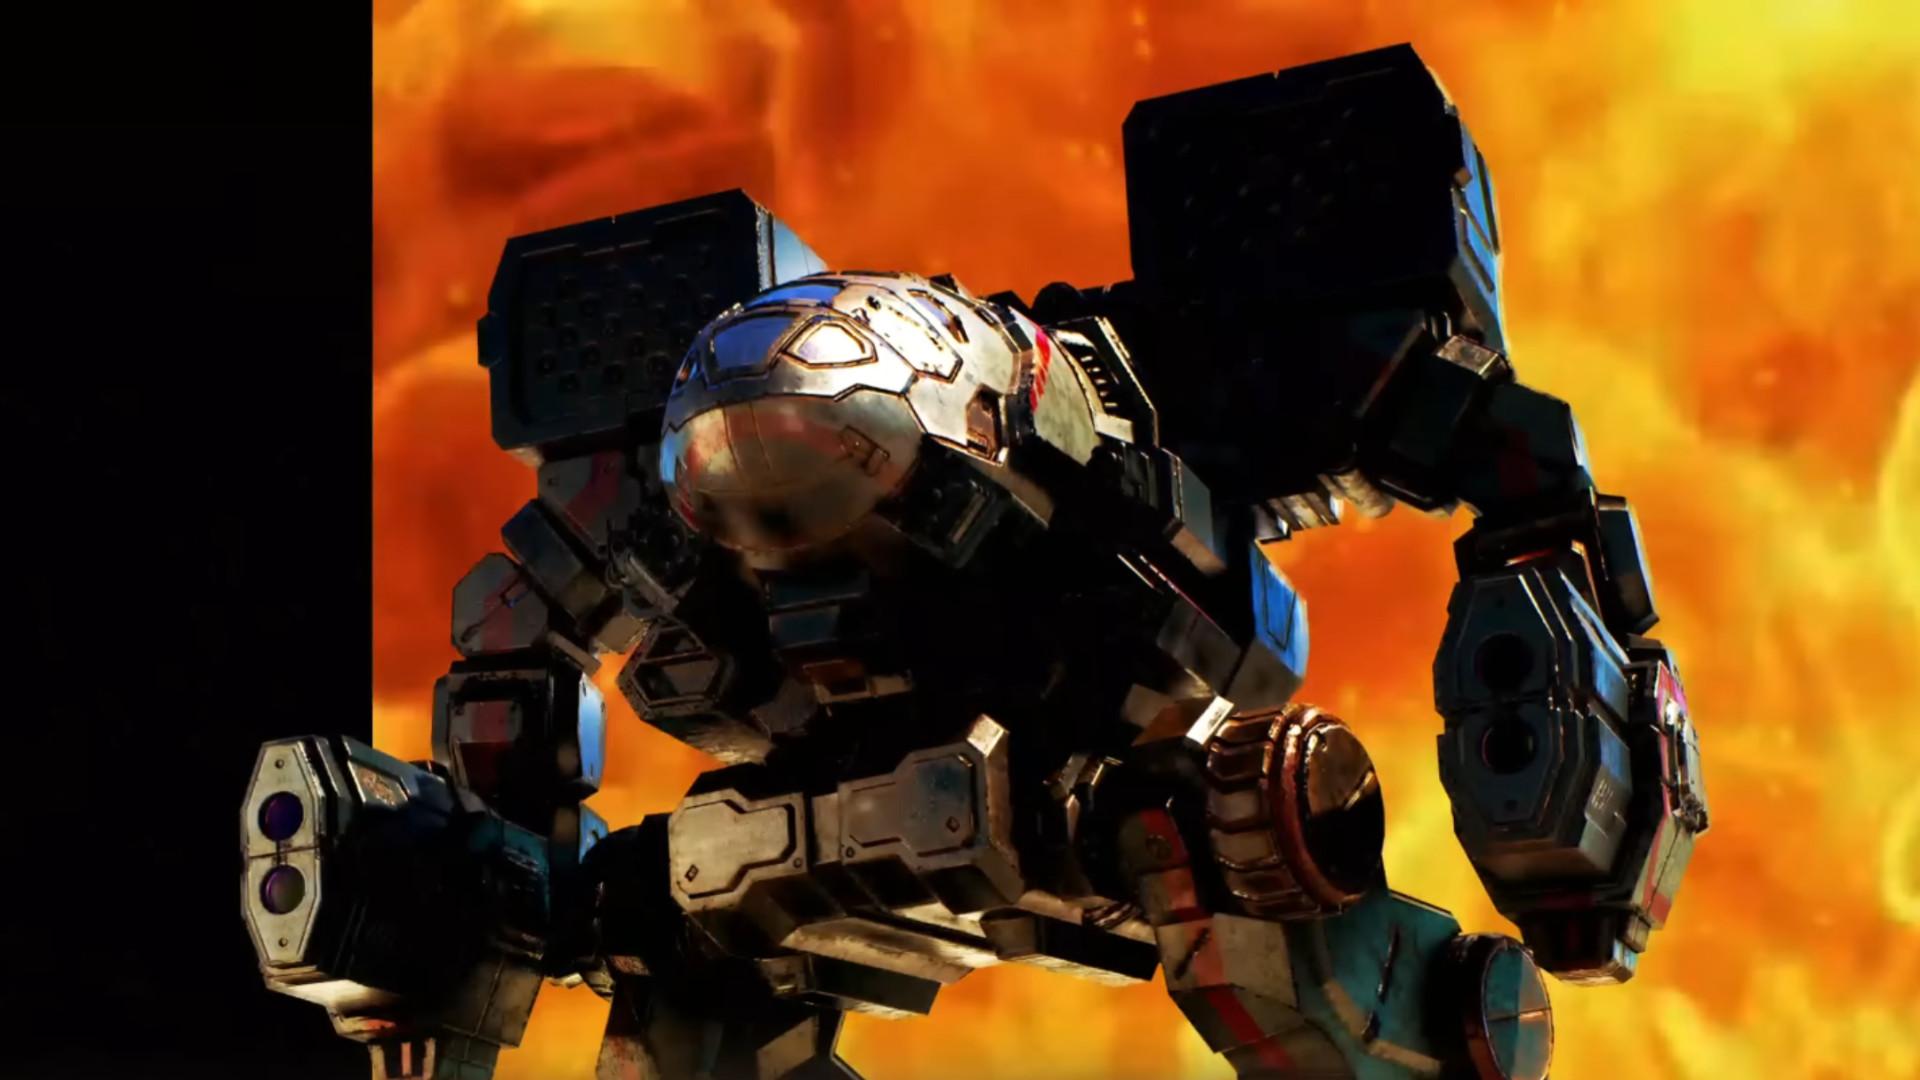 After Armored Core 6, rival MechWarrior returns with new game